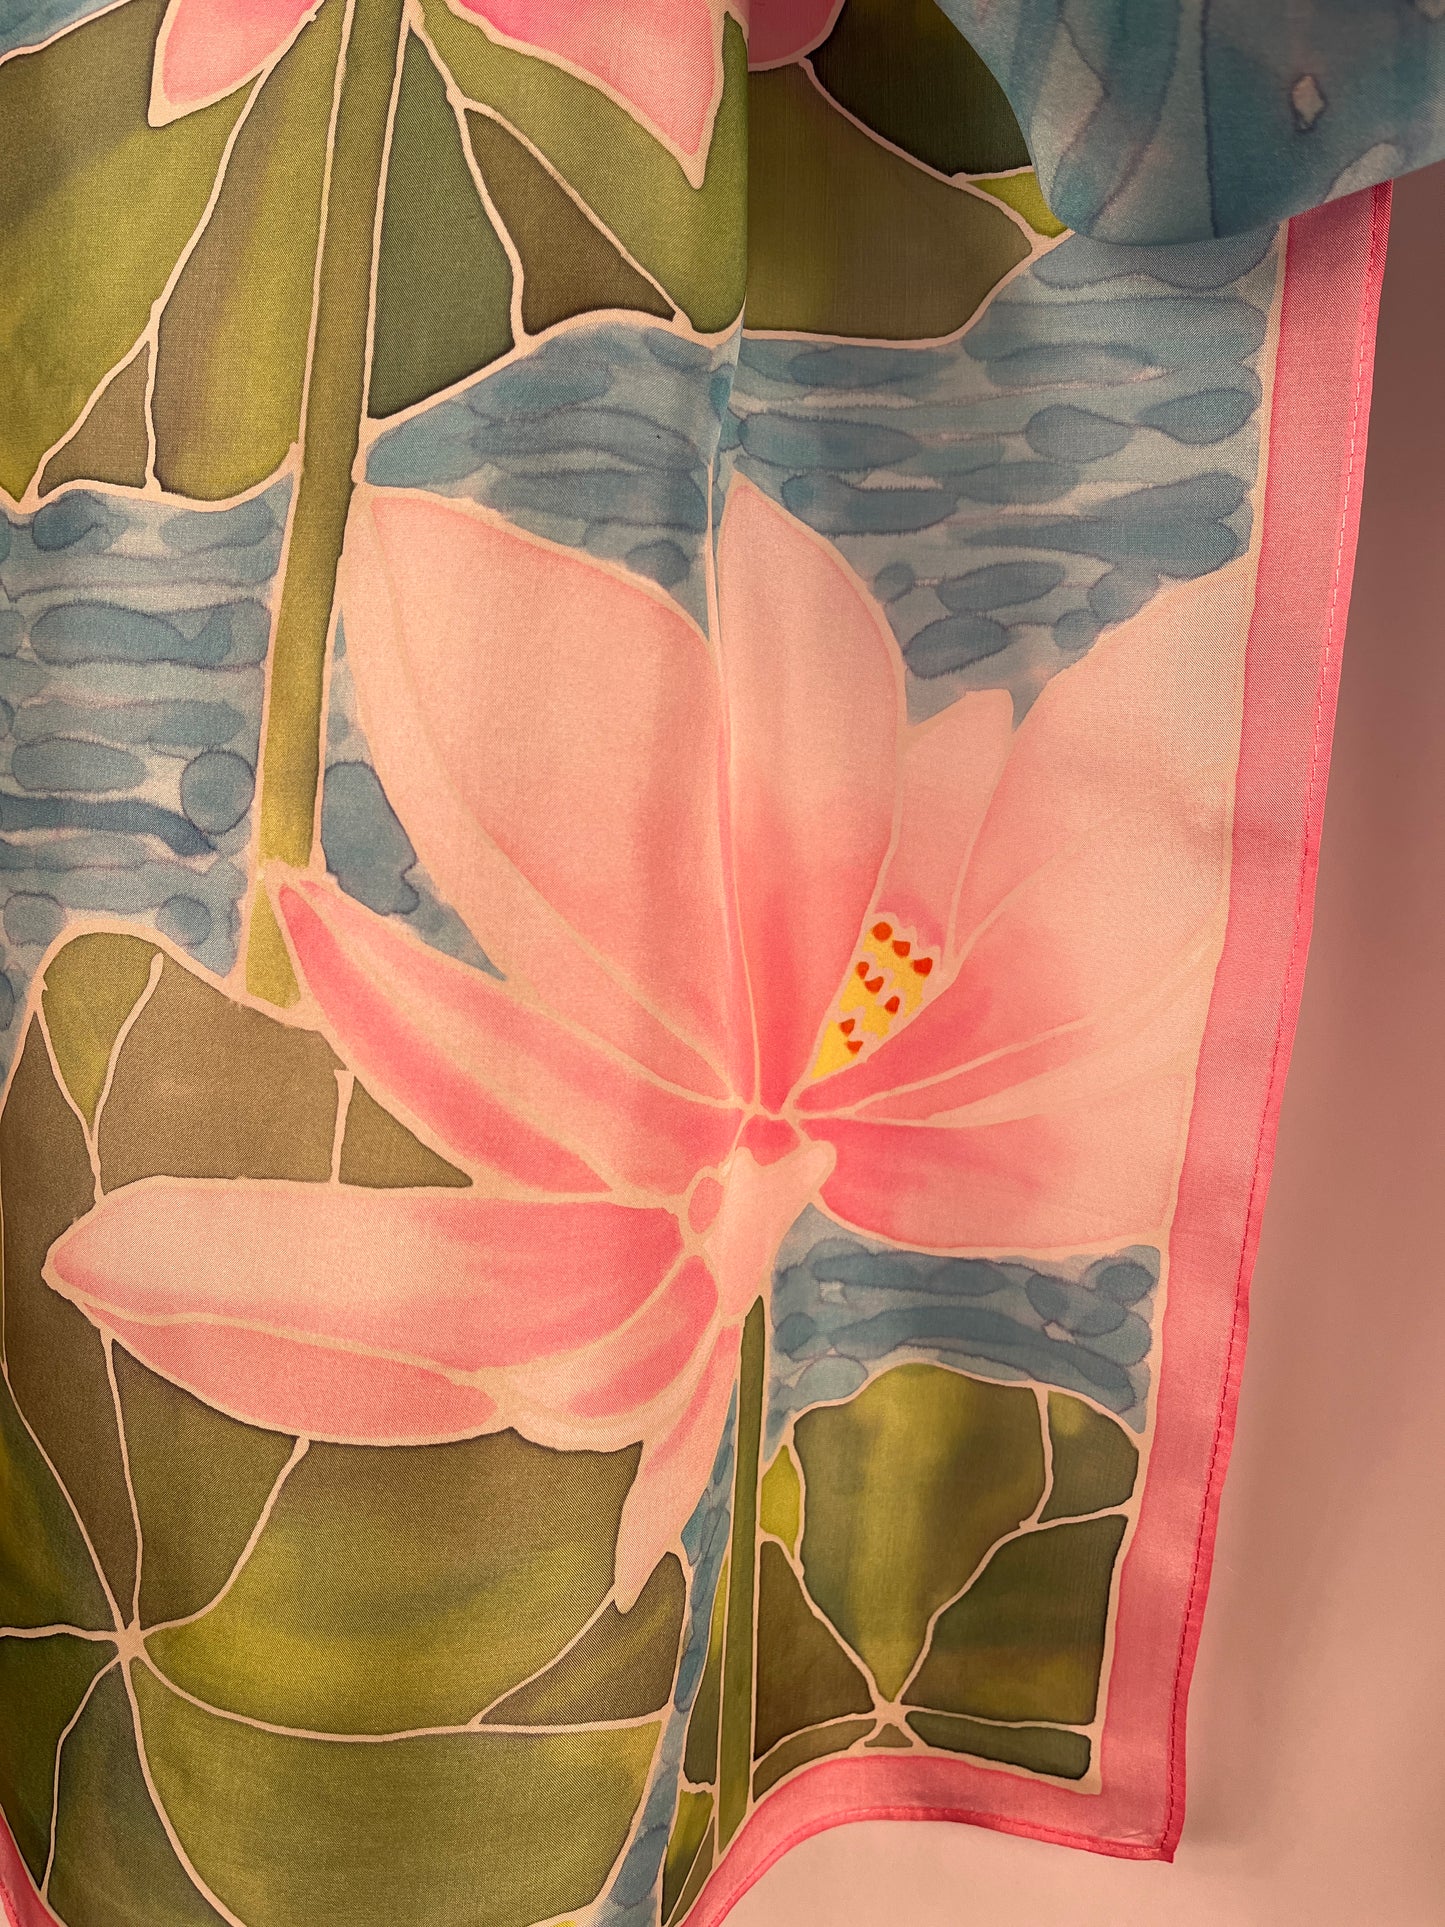 “Water Lilies” Hand-dyed Silk Scarf - $135